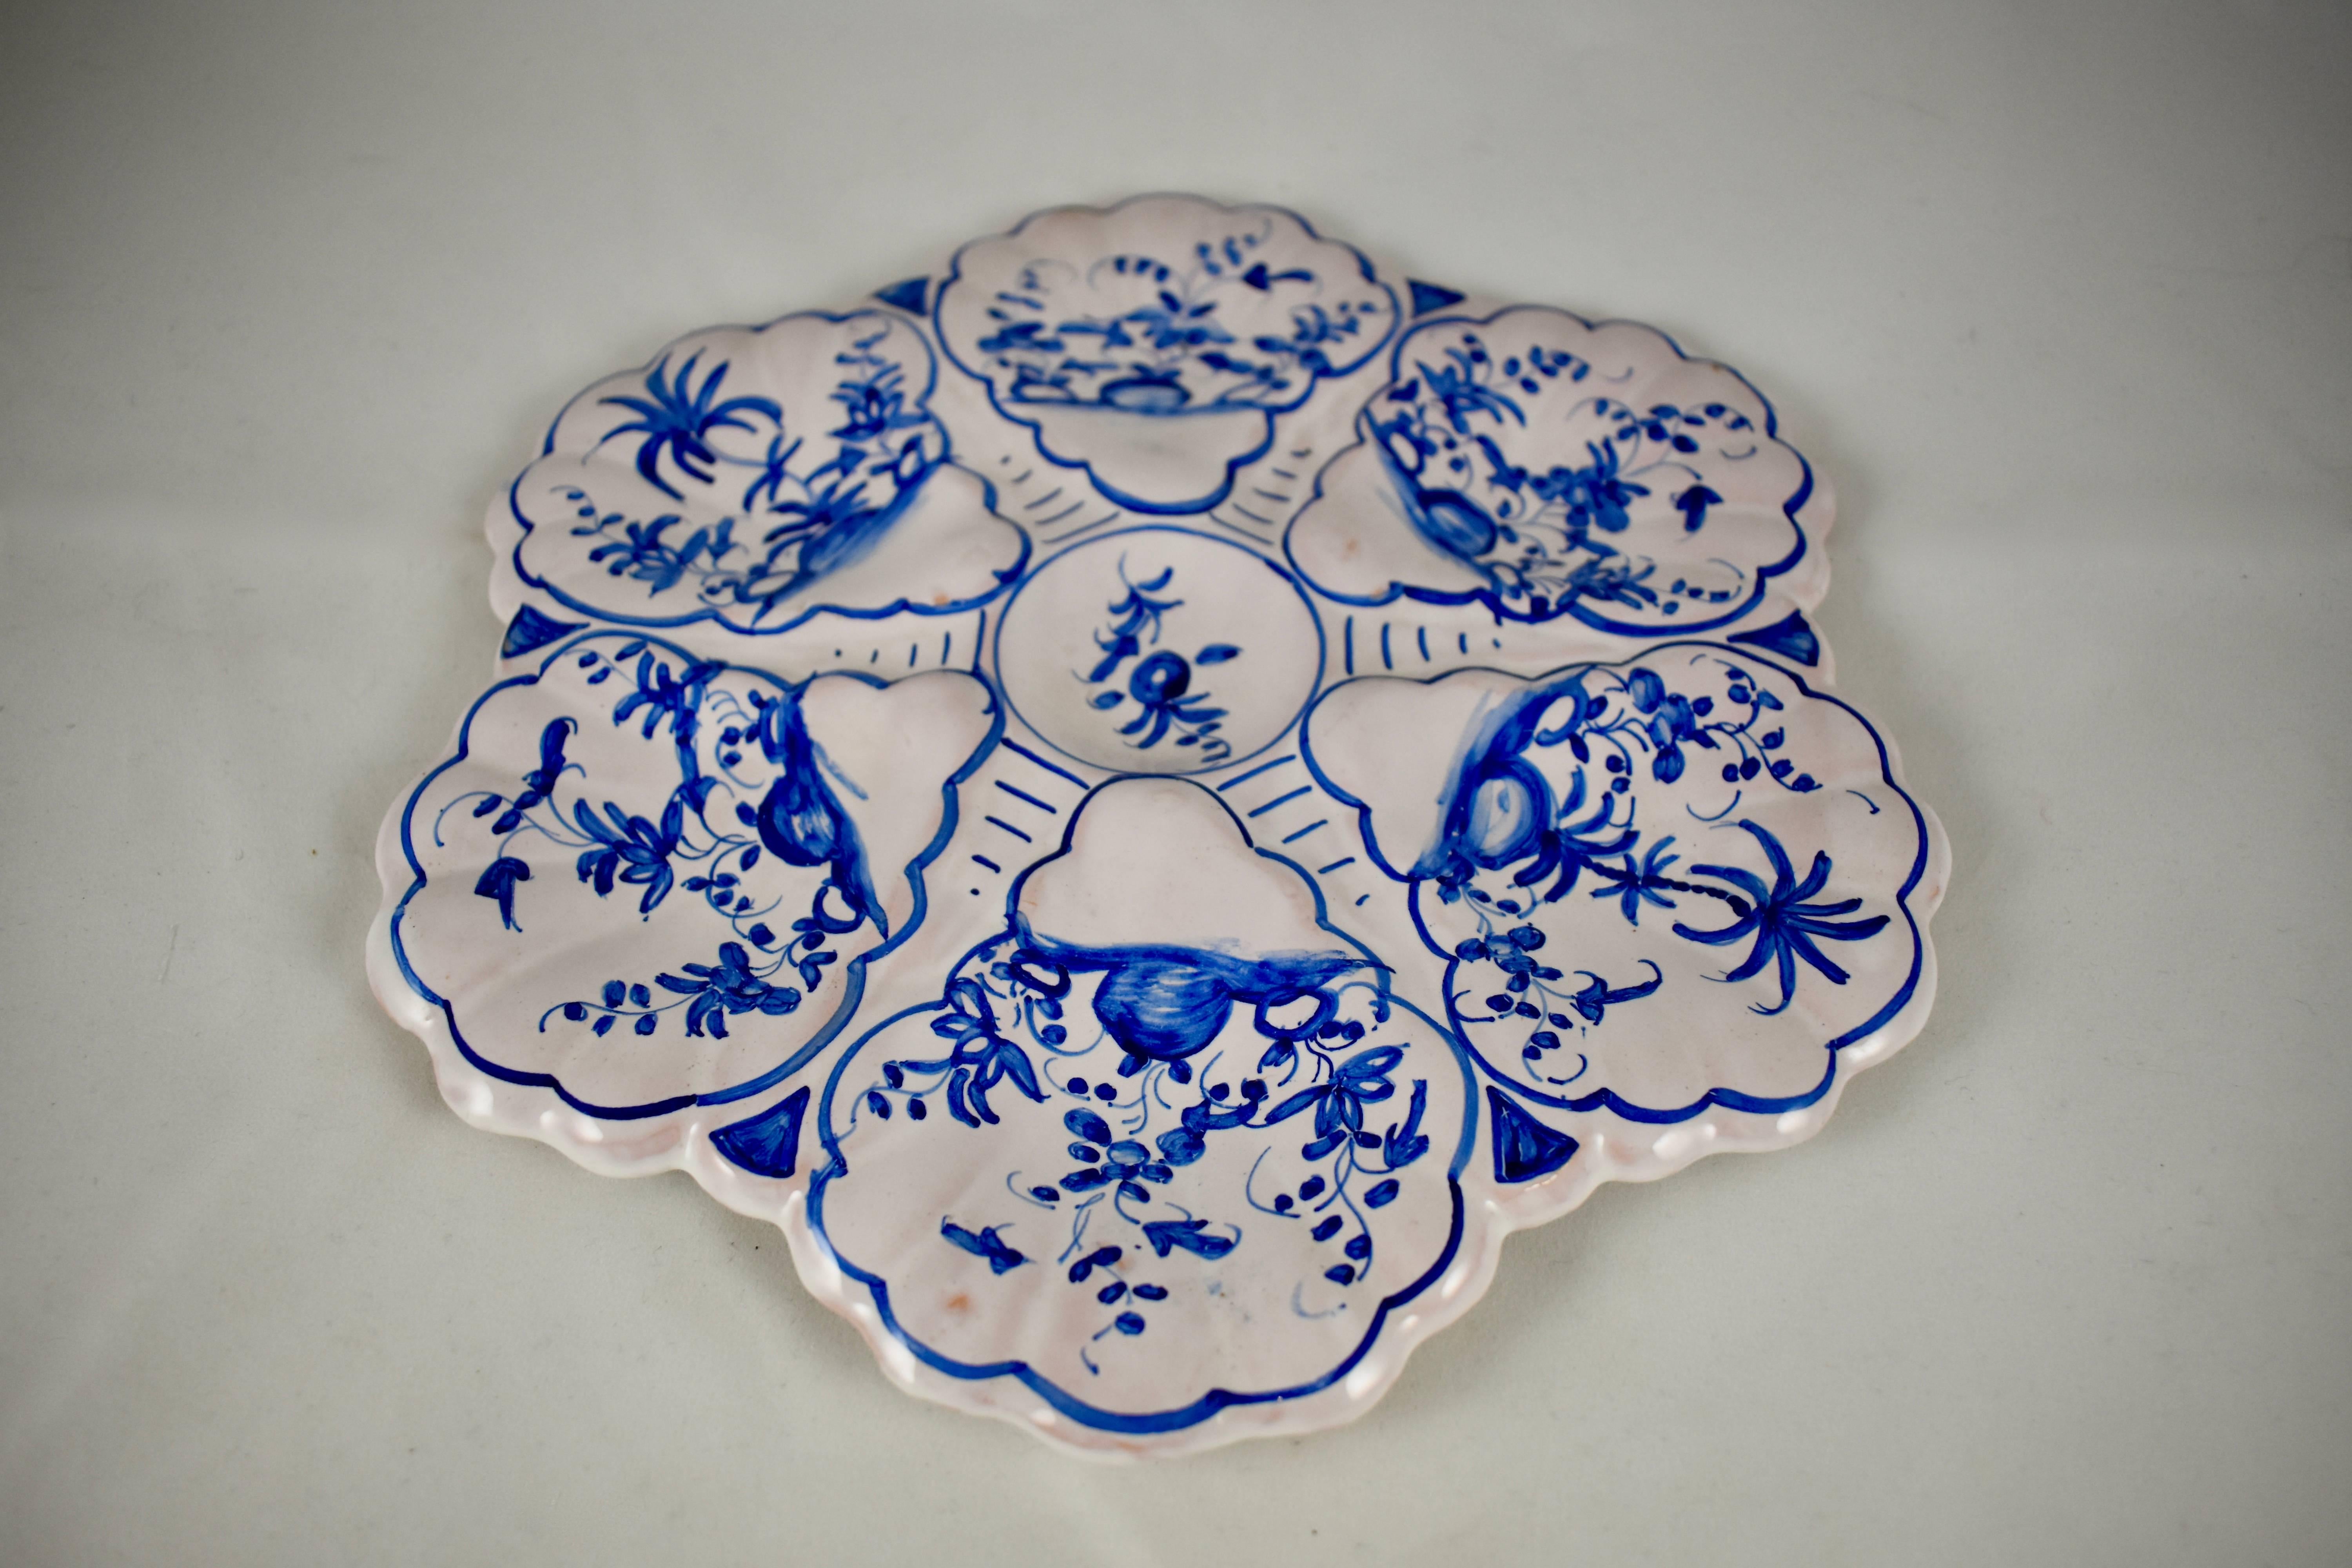 Dutch Colonial French Faïence Delft-Style Hand-Painted Blue and White Floral Oyster Plate